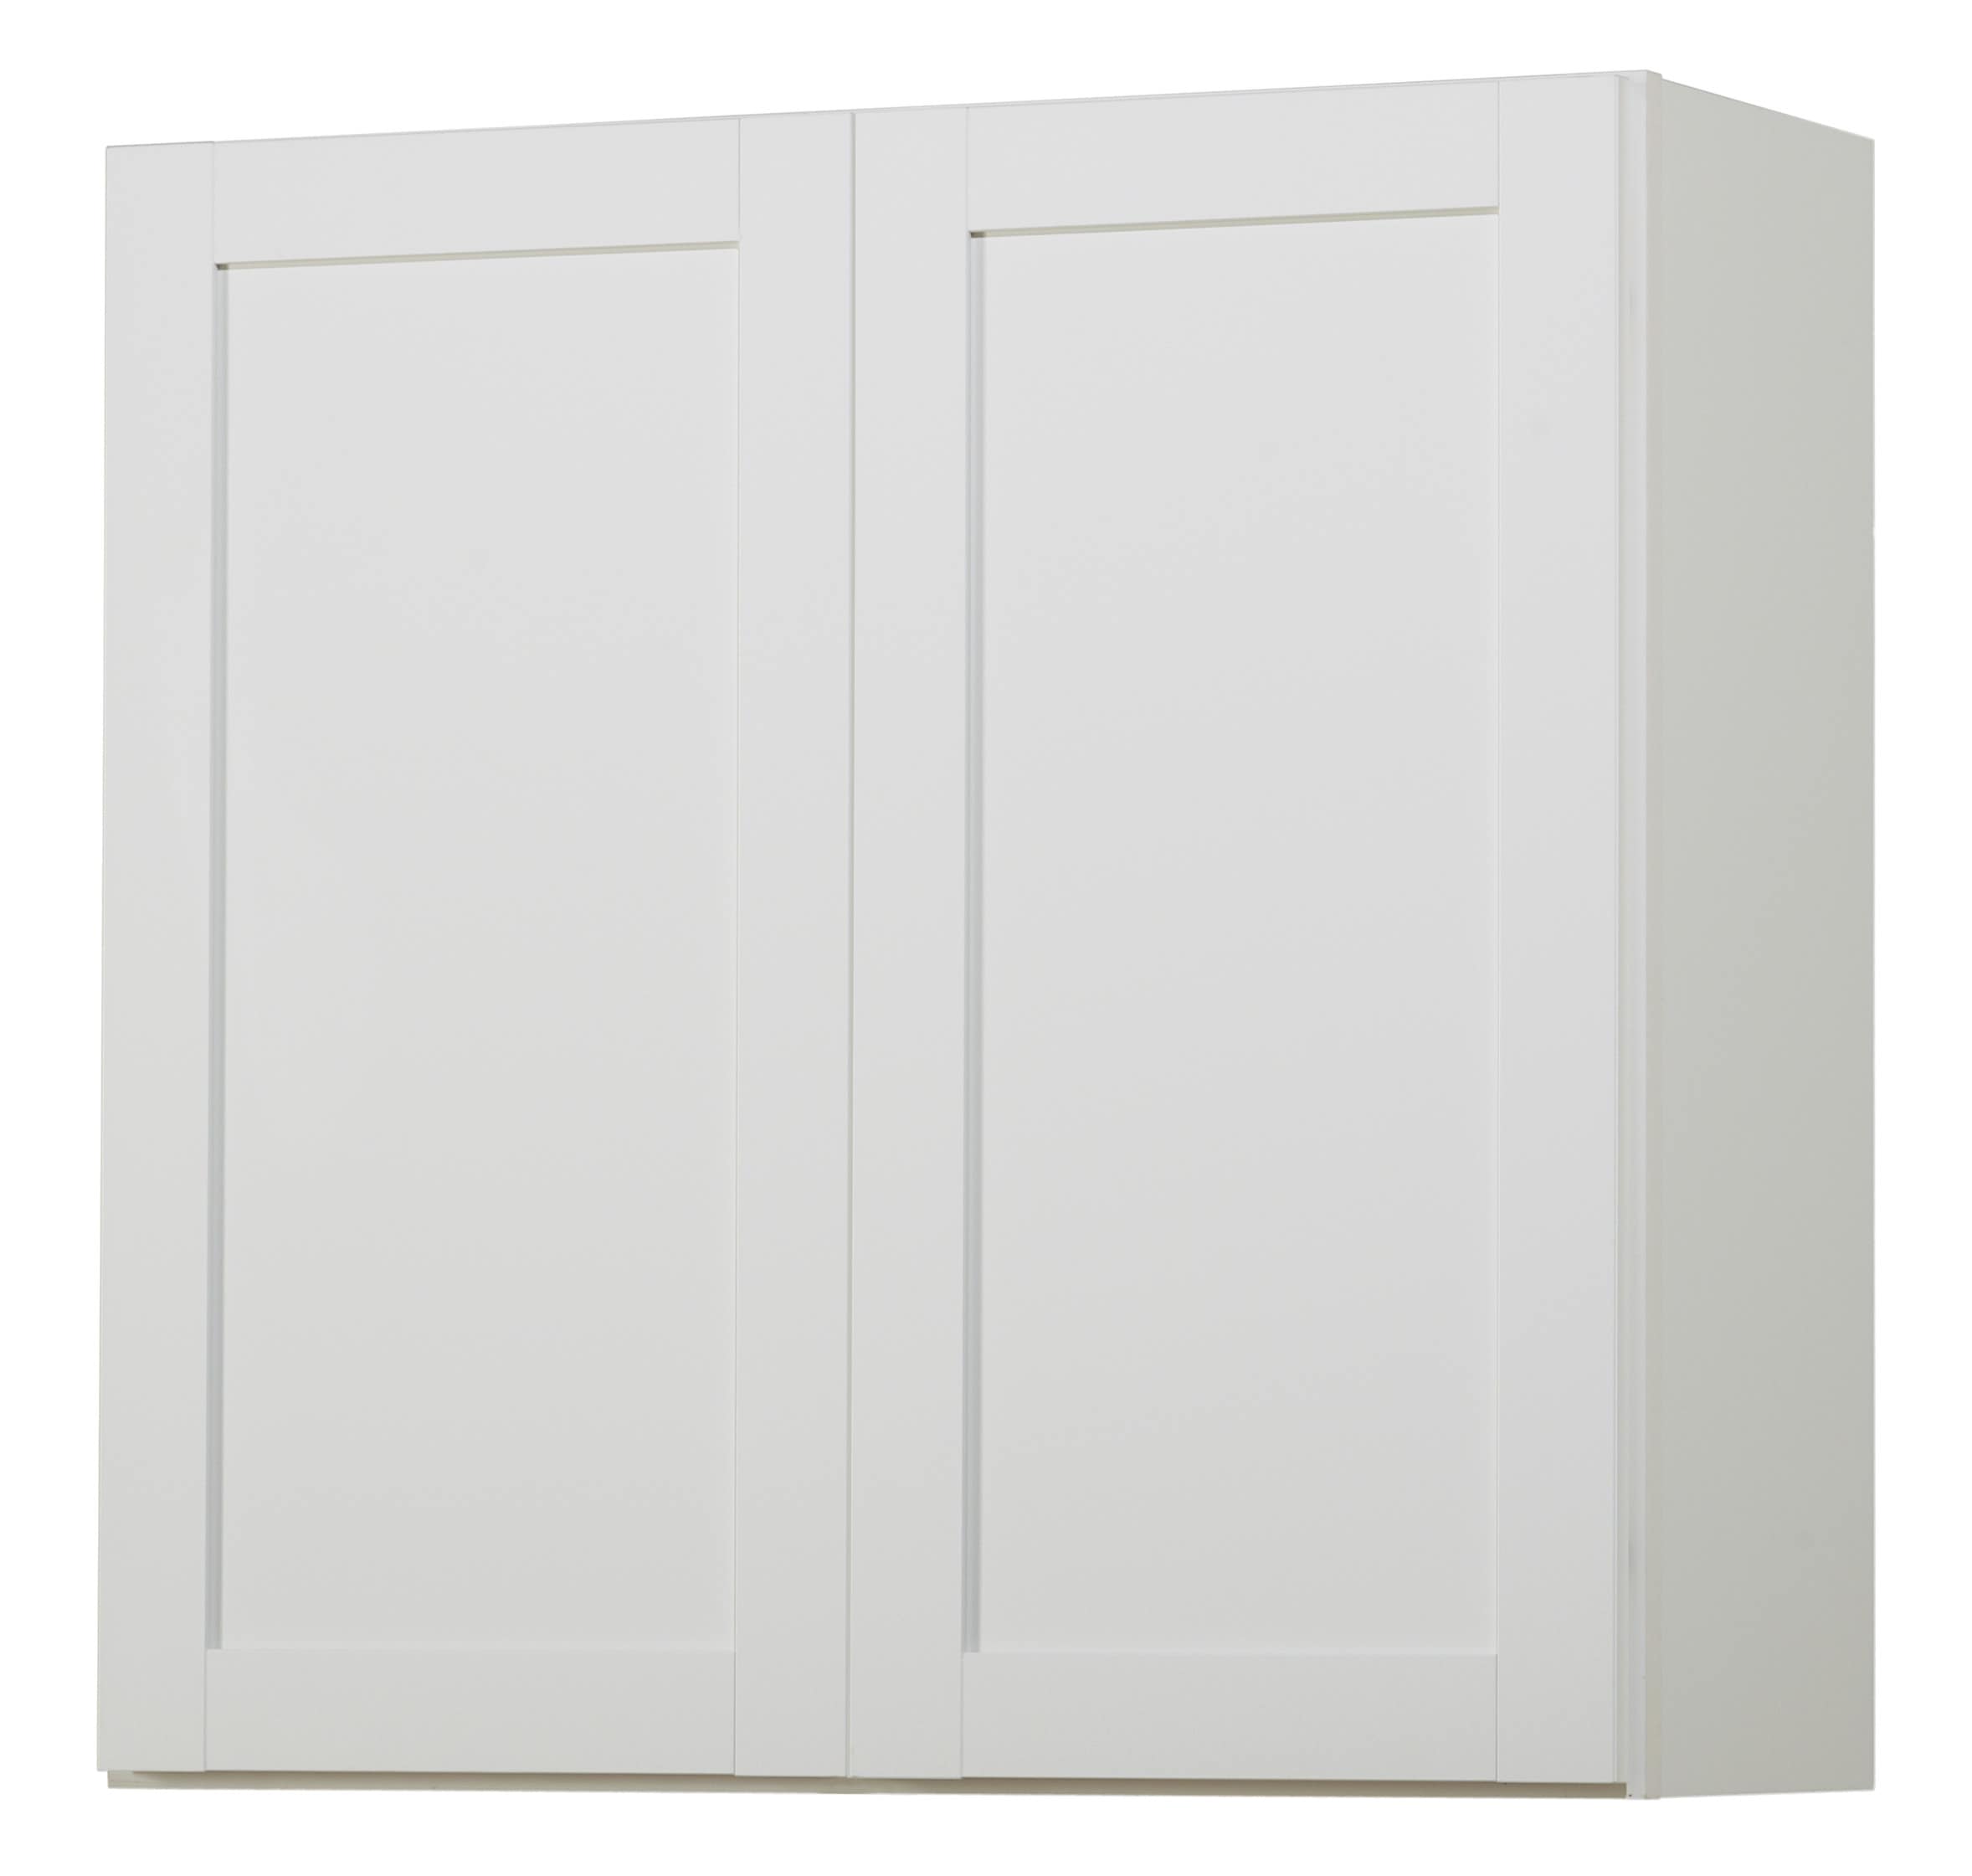 Diamond Now Arcadia 30 In W X H 12 D White Door Wall Fully Assembled Cabinet Recessed Panel Shaker Style The Kitchen Cabinets Department At Lowes Com